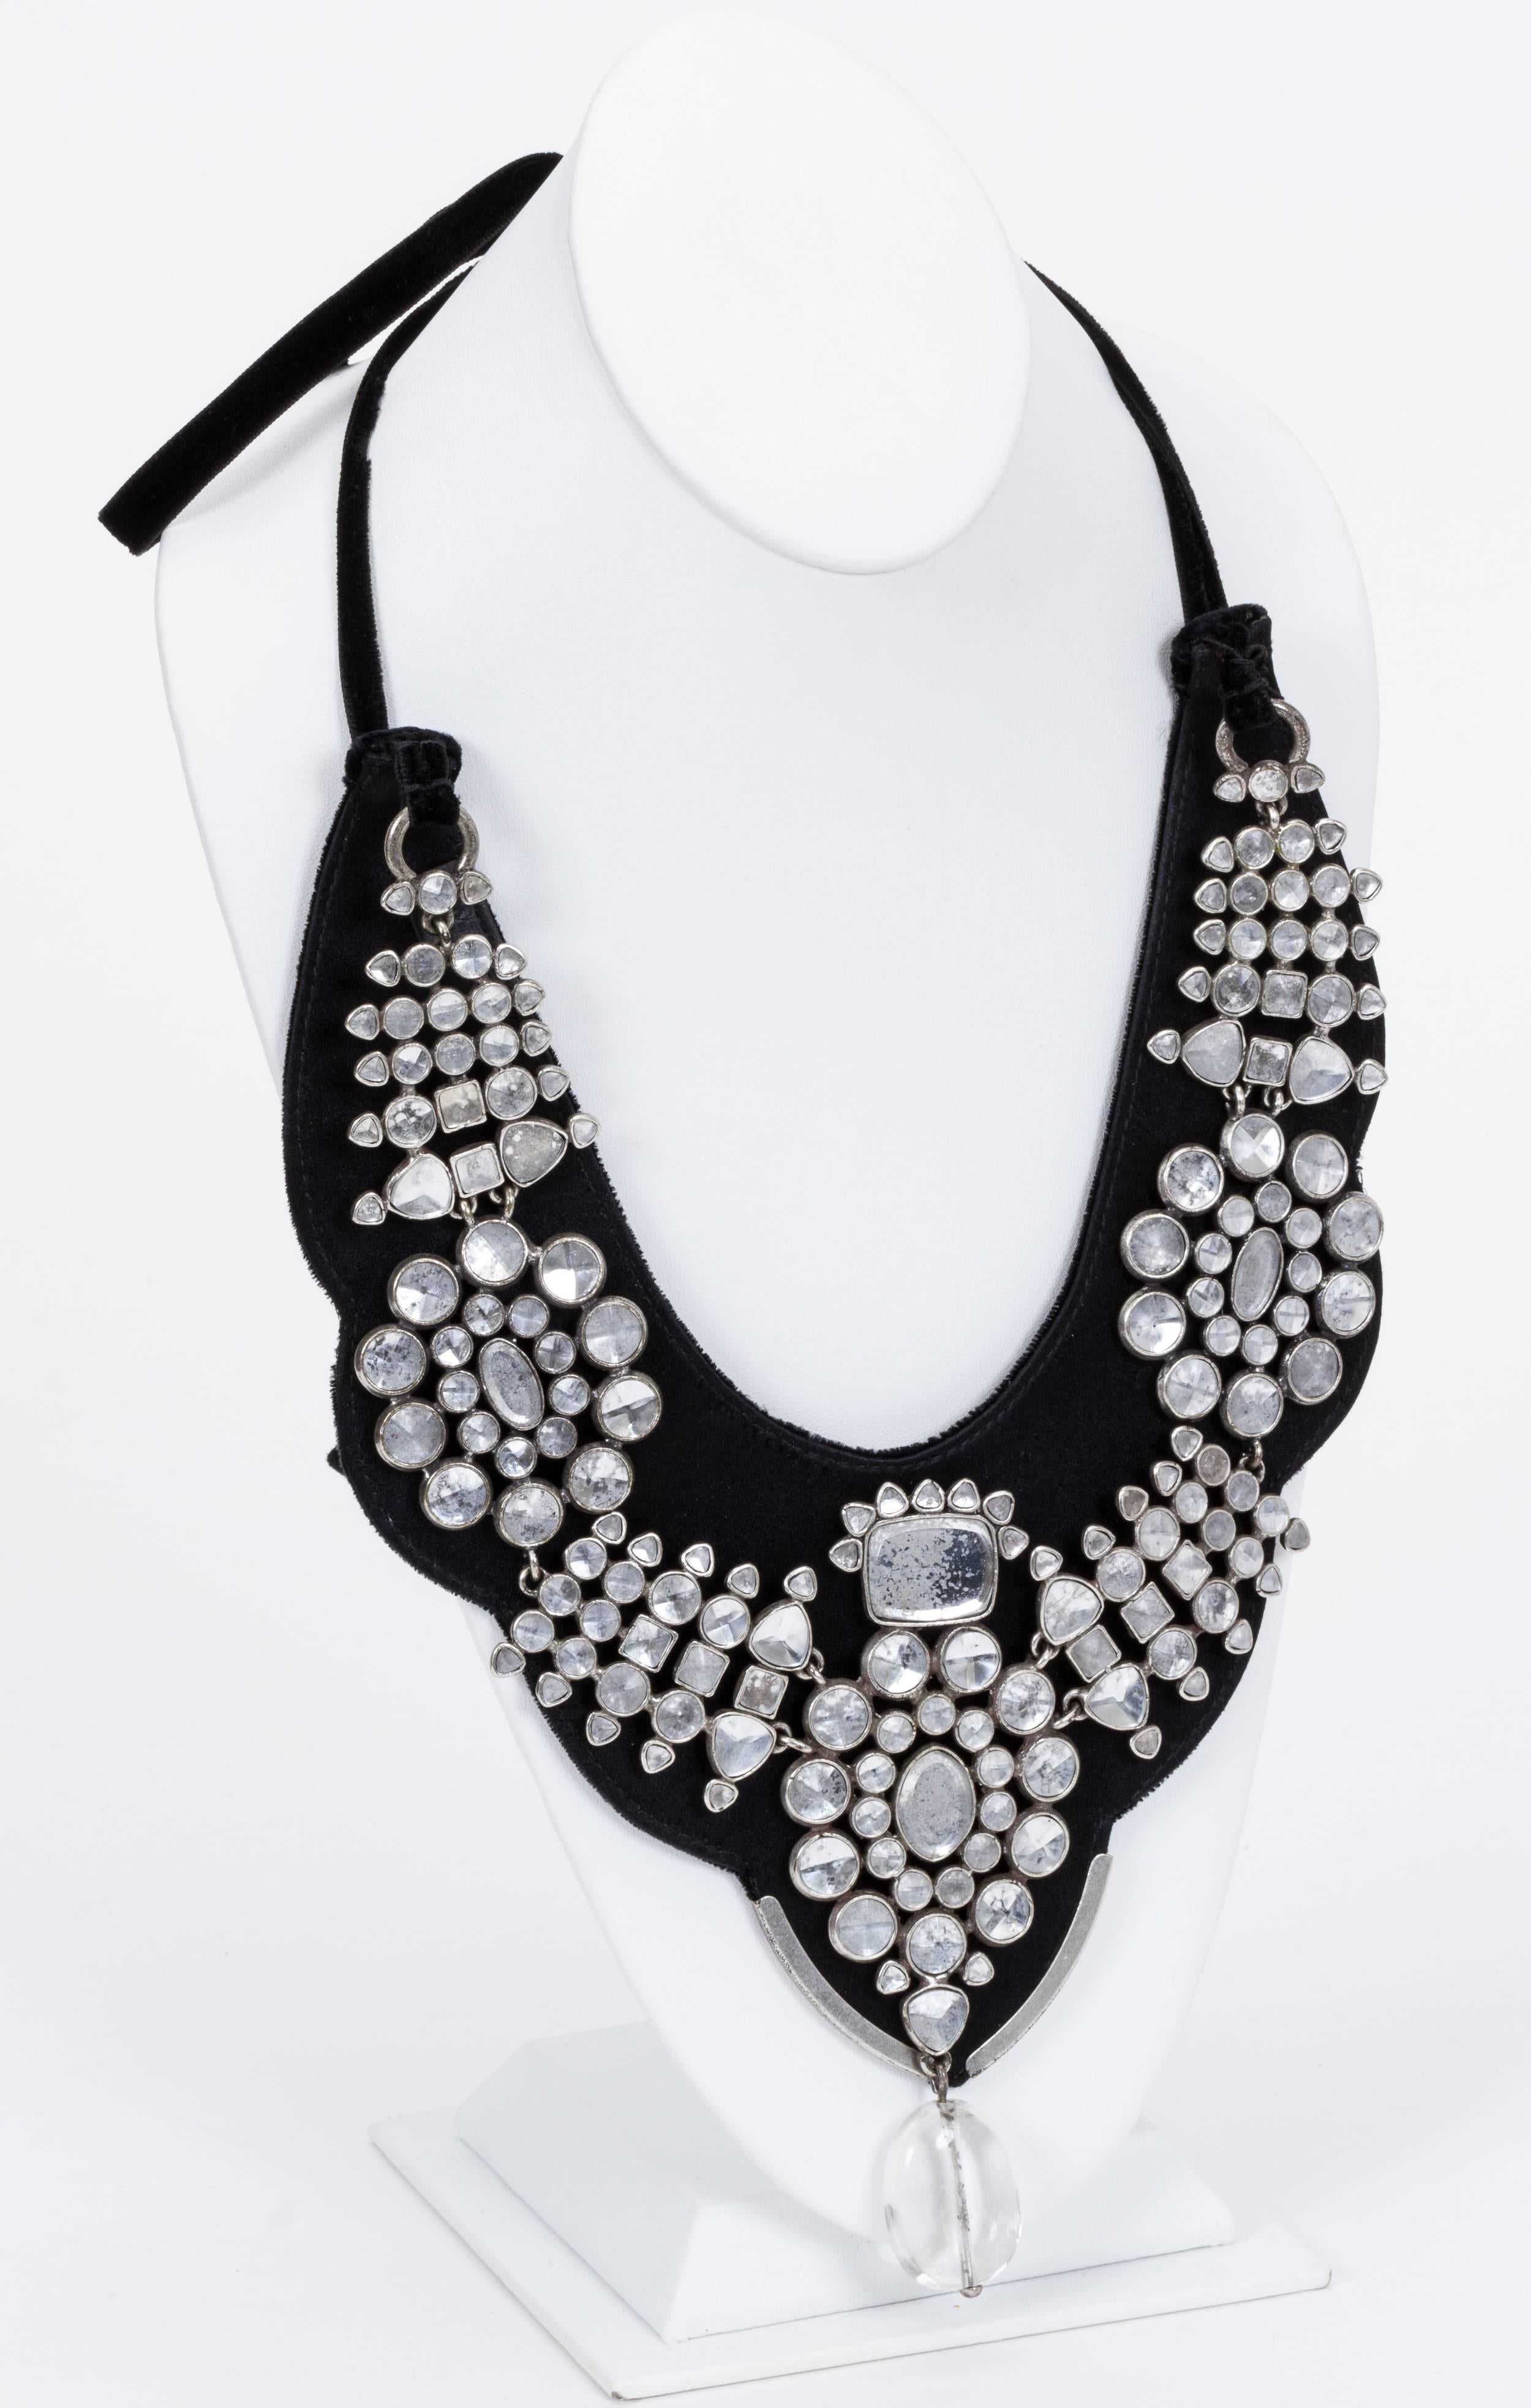 YSL black oversize satin bib necklace with black velvet tie at neck. Detailed in glass rhinestone and bead detail. Comes in original YSL box.
